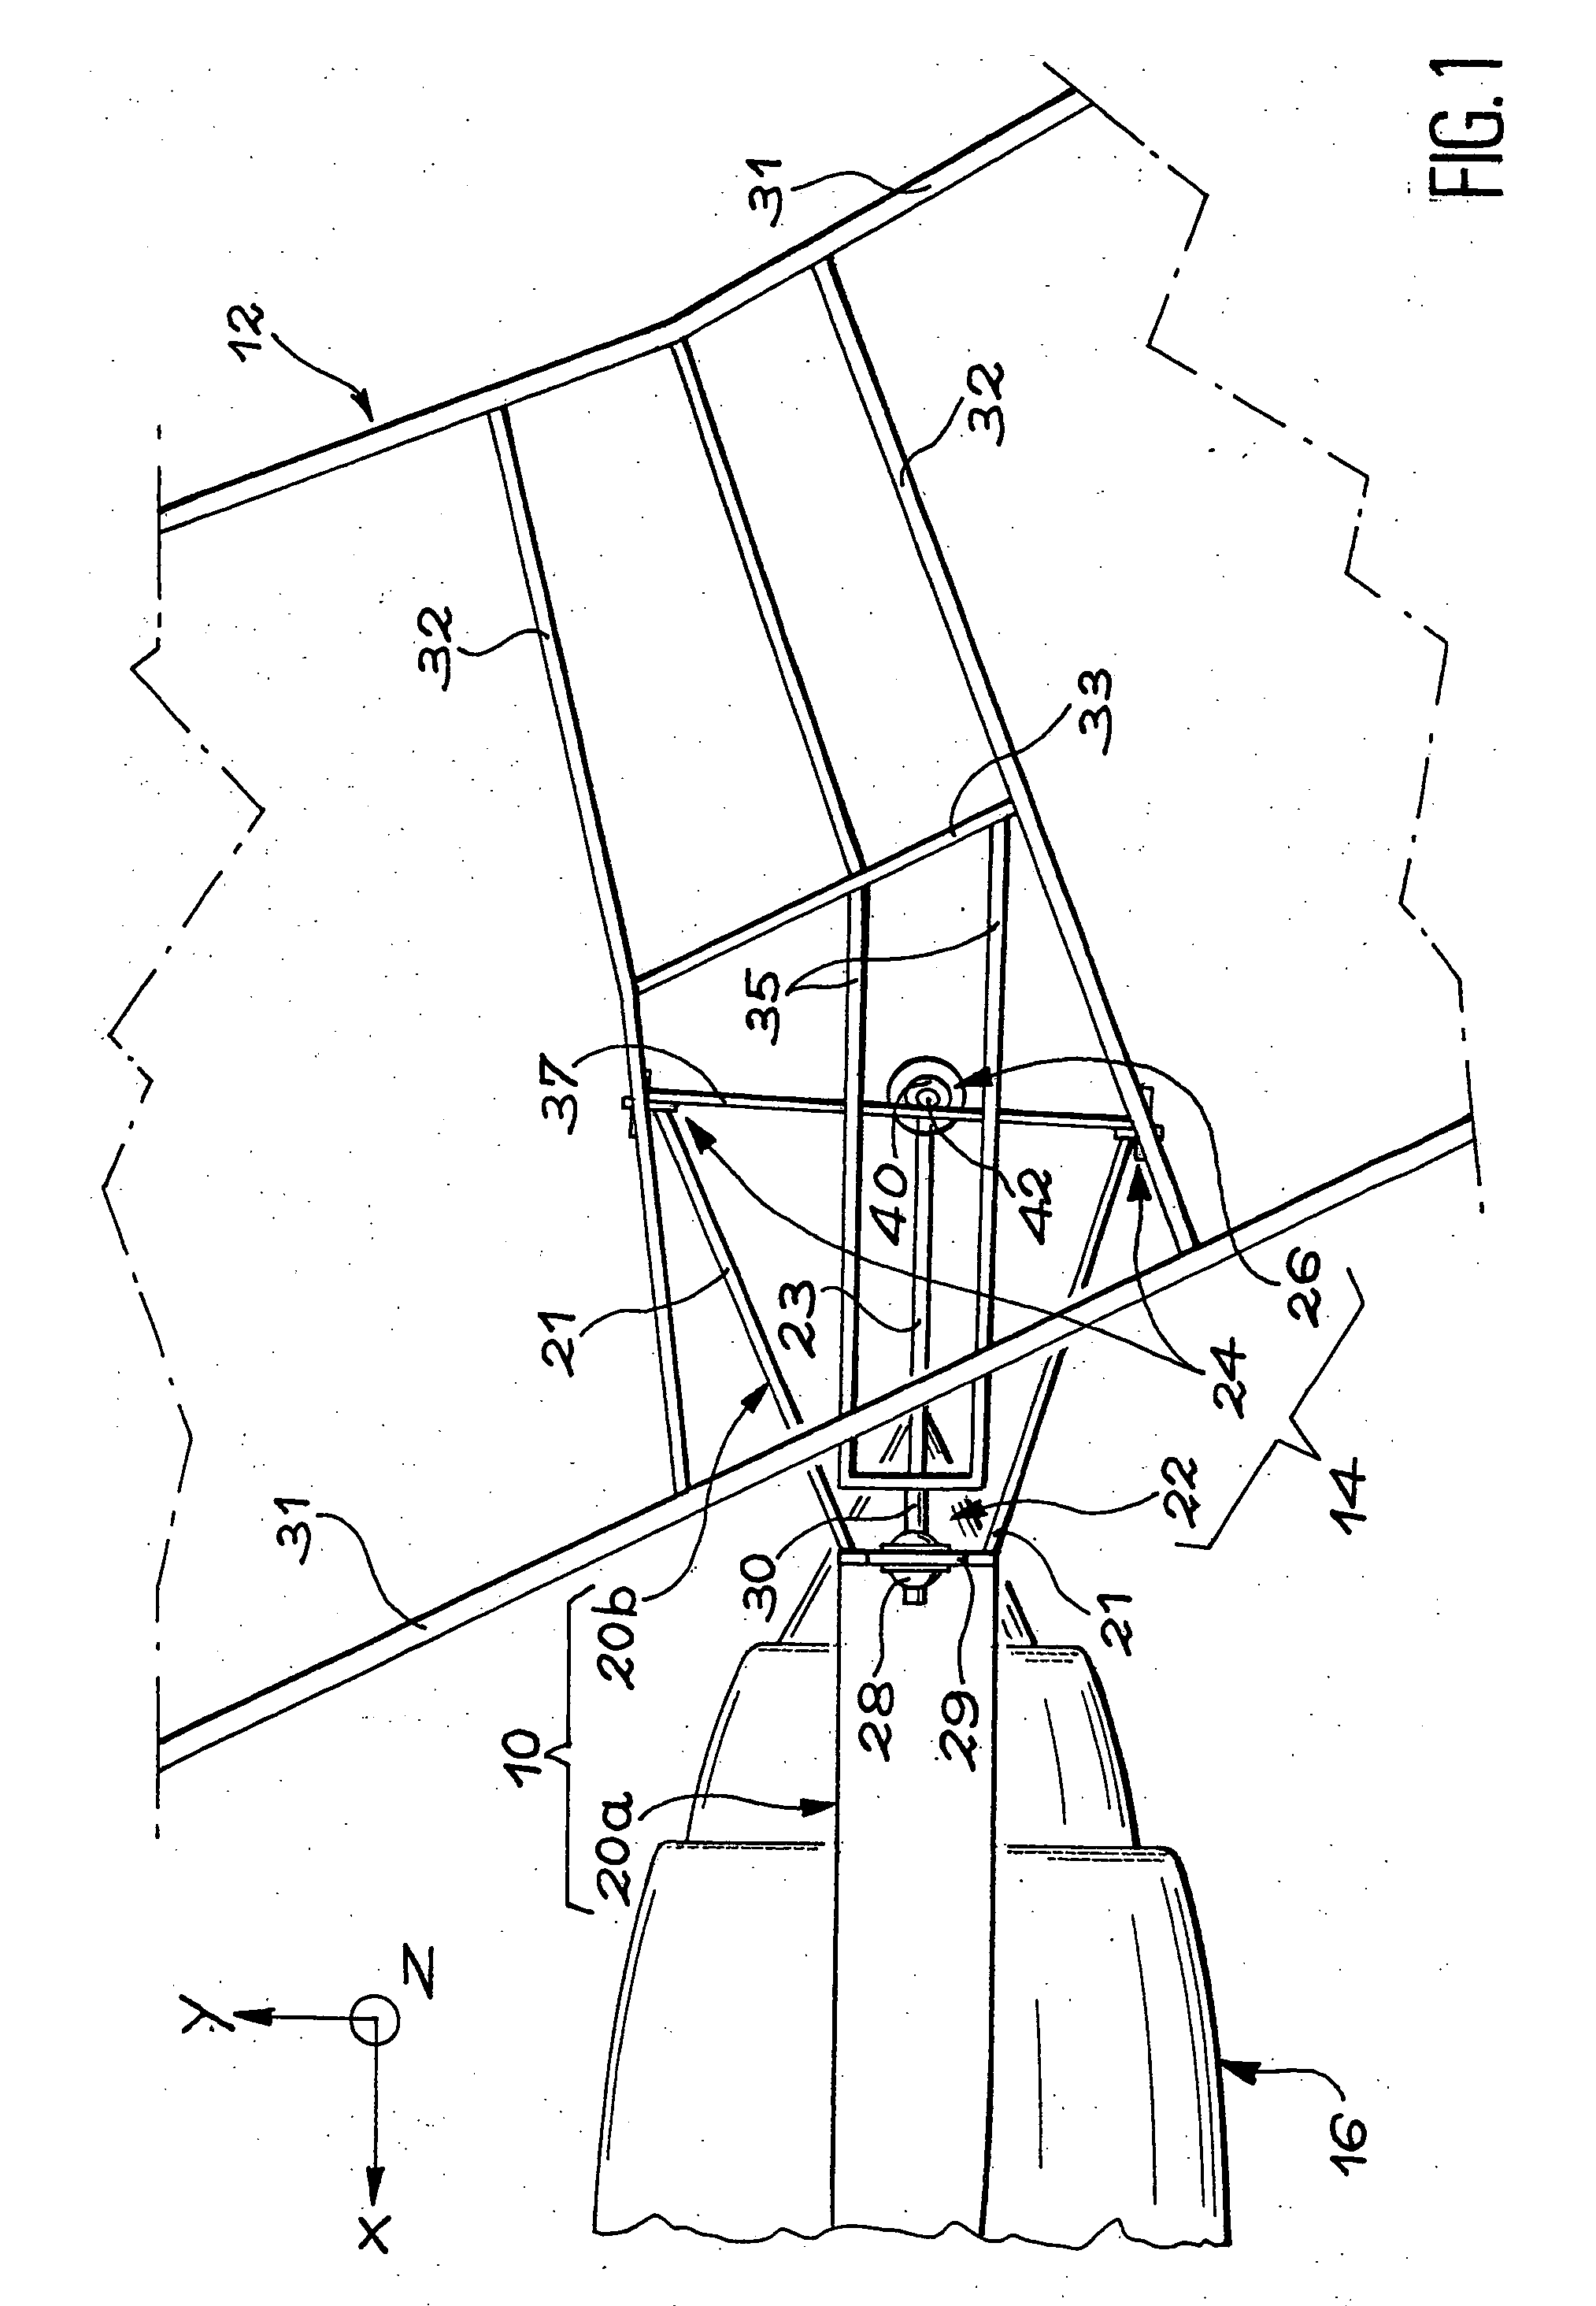 Engine pylon suspension attachment of an engine under an aircraft wing section